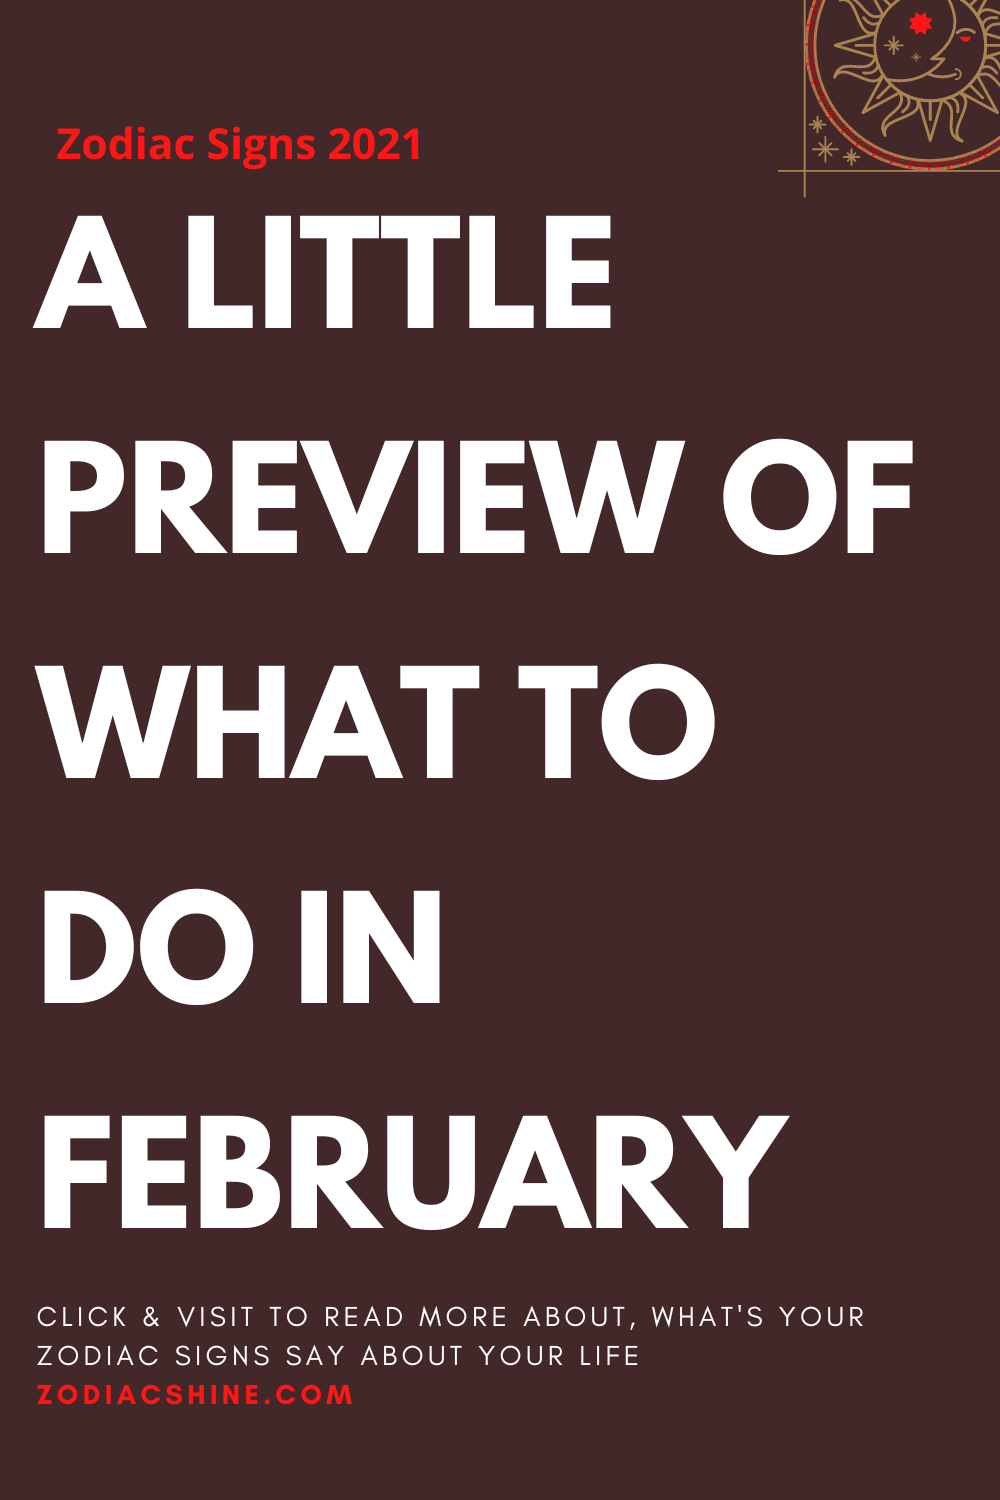 A LITTLE PREVIEW OF WHAT TO DO IN FEBRUARY